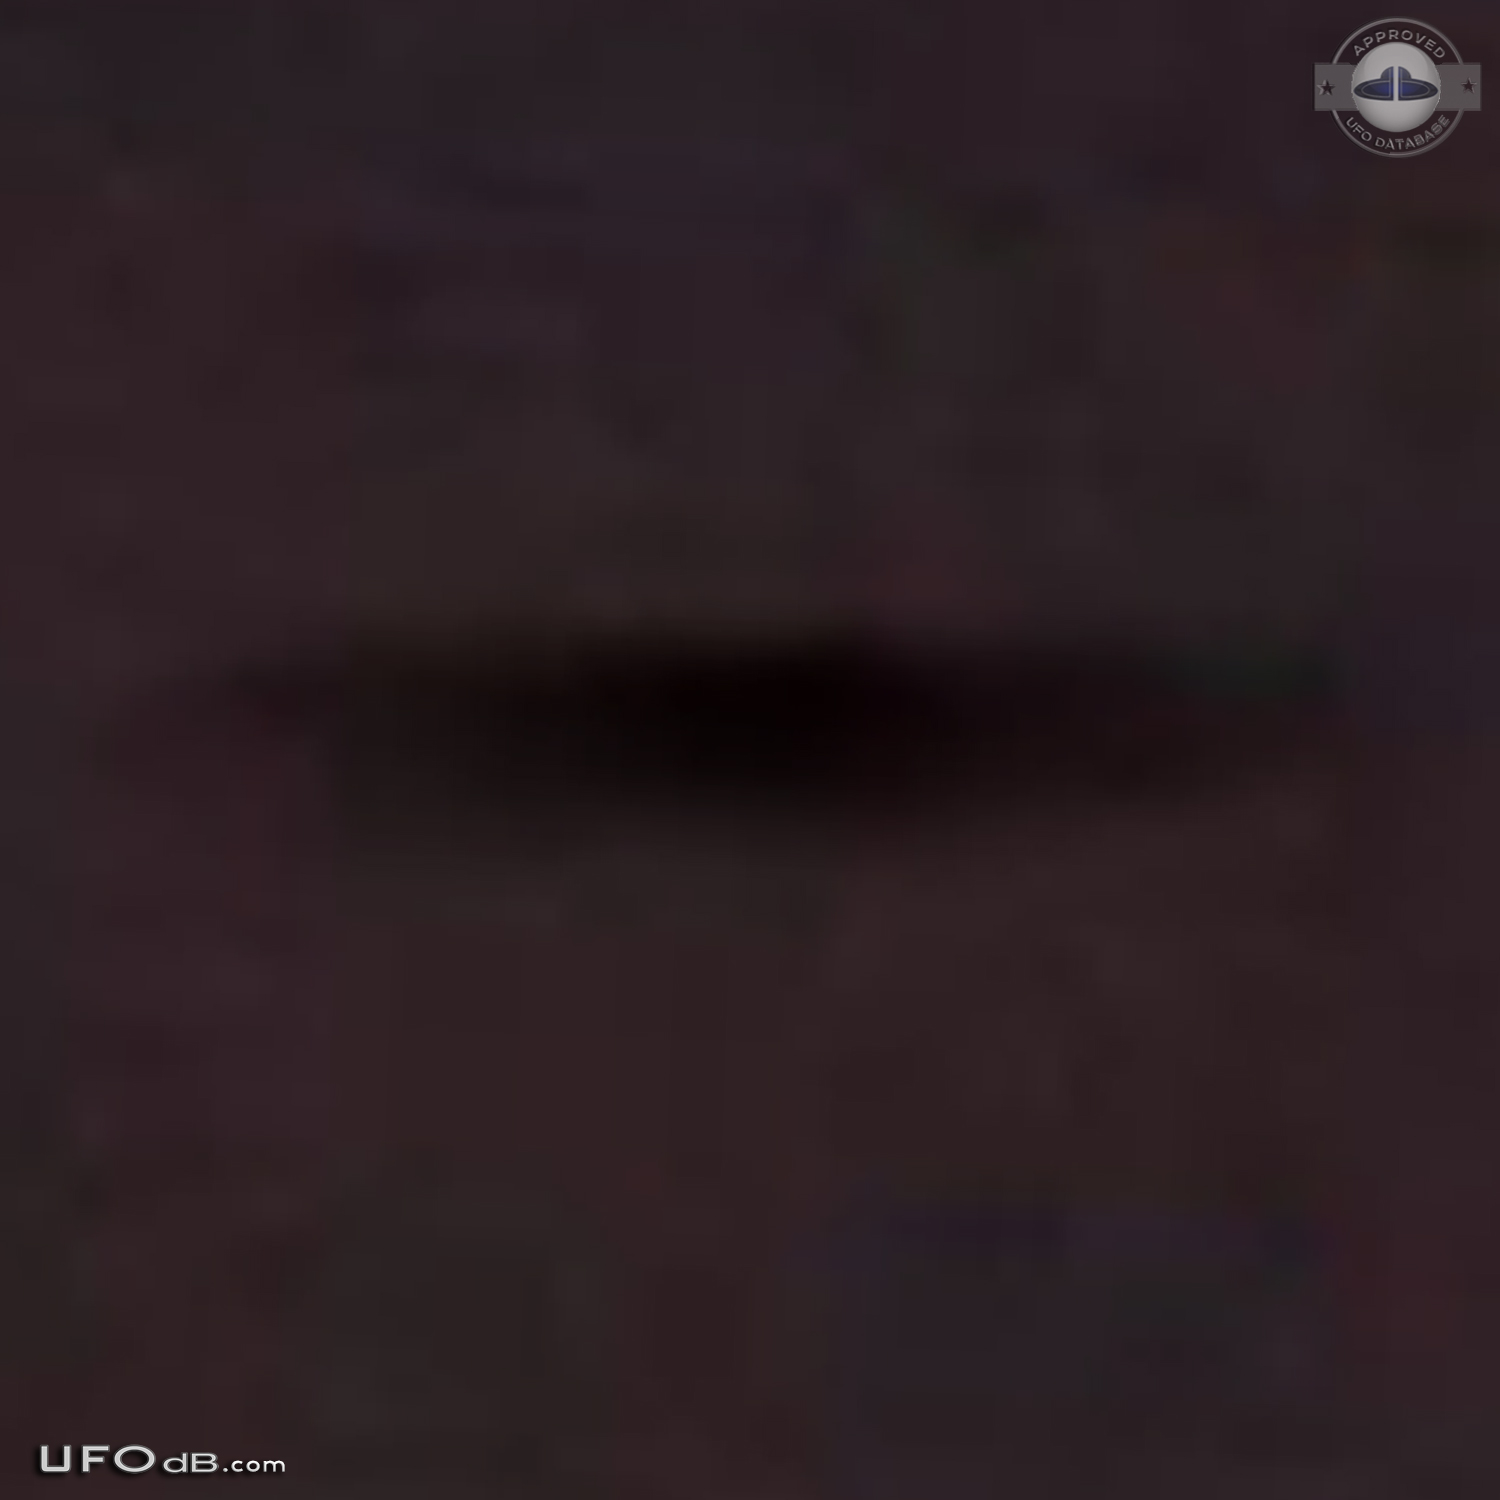 Rainbow Photo get UFO passing over San Fransisco, California USA 2012 UFO Picture #489-4